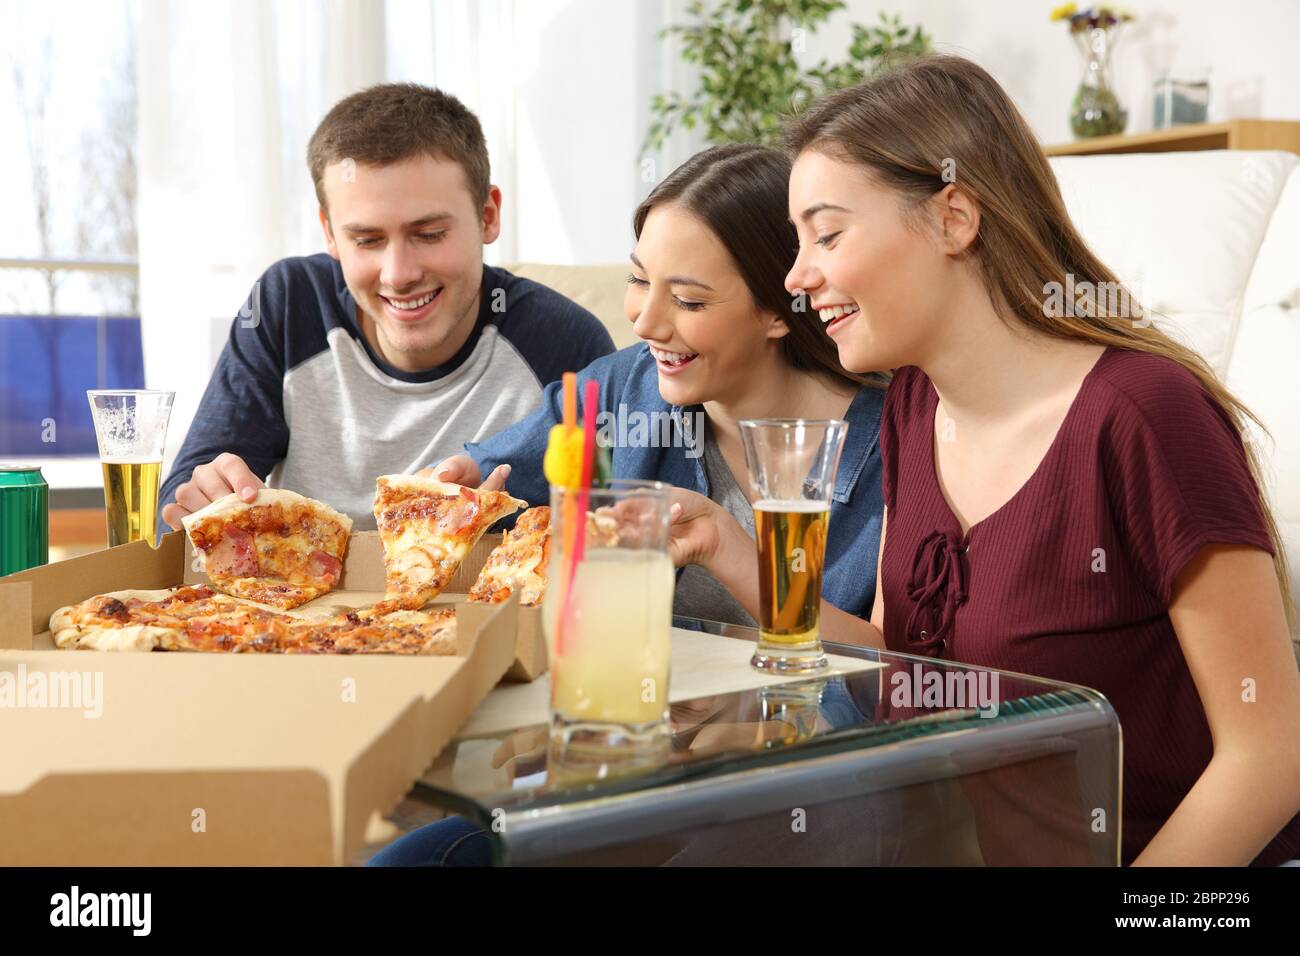 Three Friends Eating Pizza Stock Photo, Picture and Royalty Free Image.  Image 10735477.